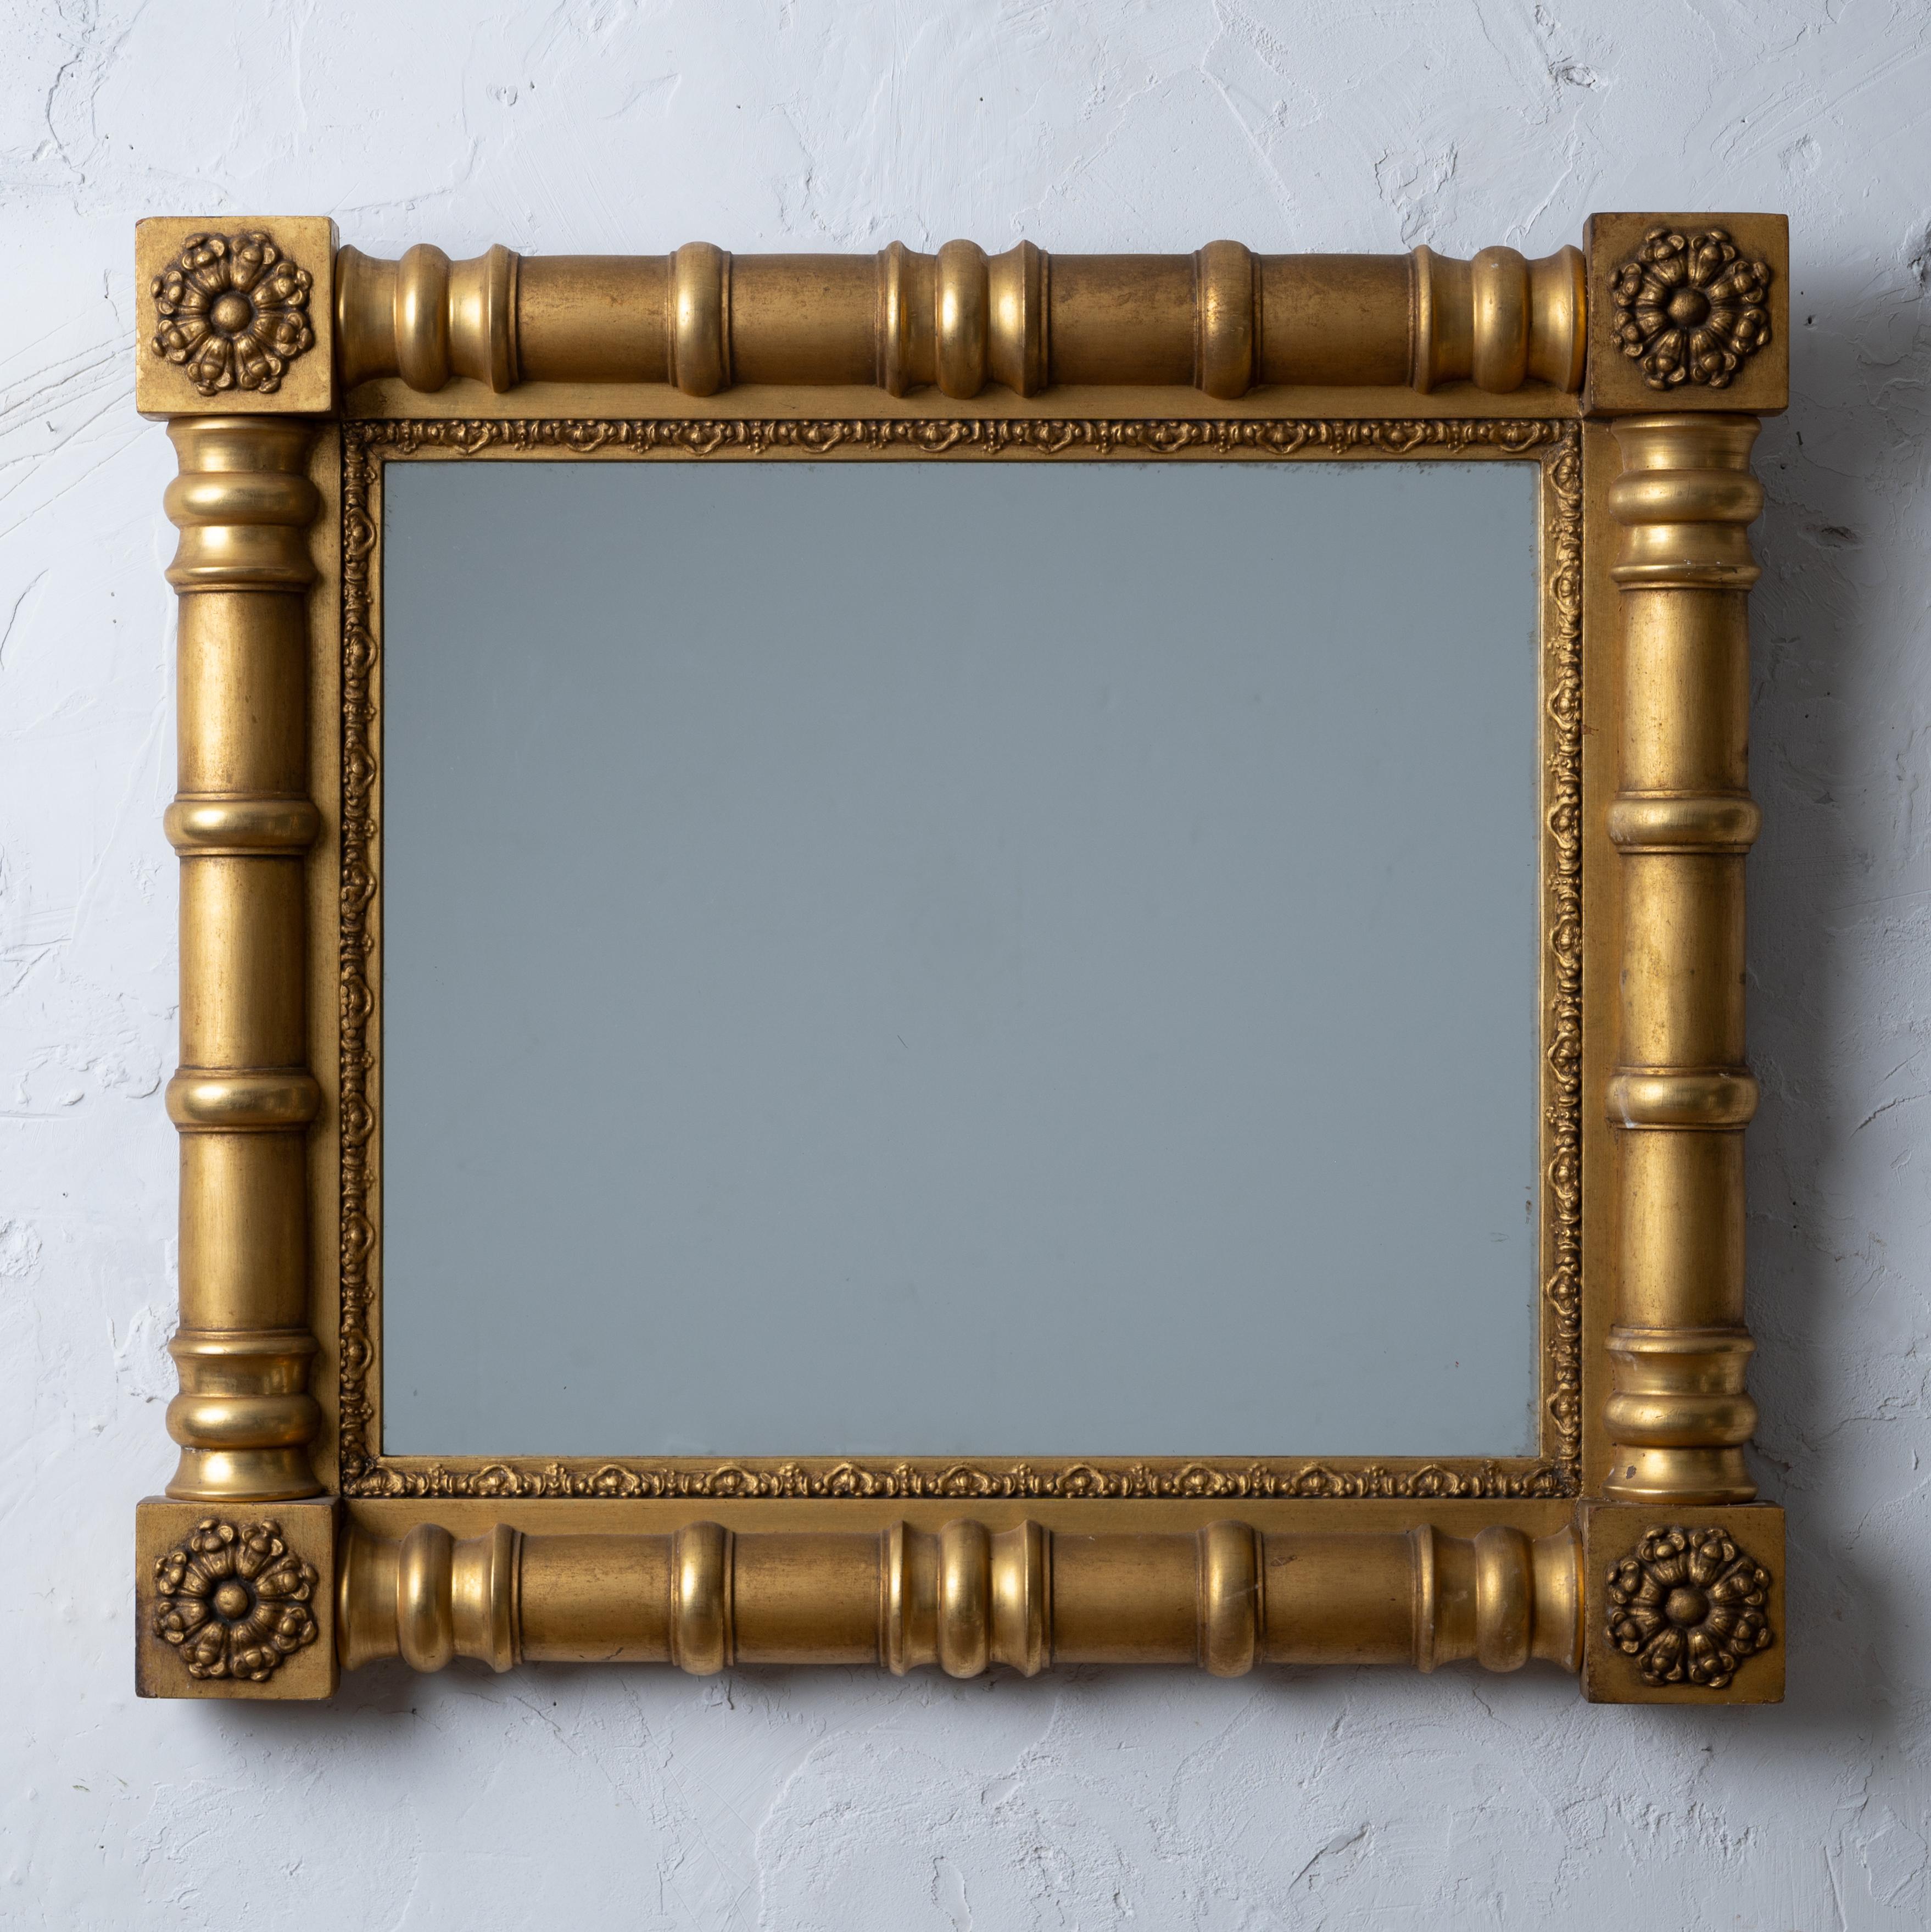 A Sheraton giltwood mirror, circa 1830.
A split baluster frame with rosette corner blocks.

30 by 26 ¾ inches 

